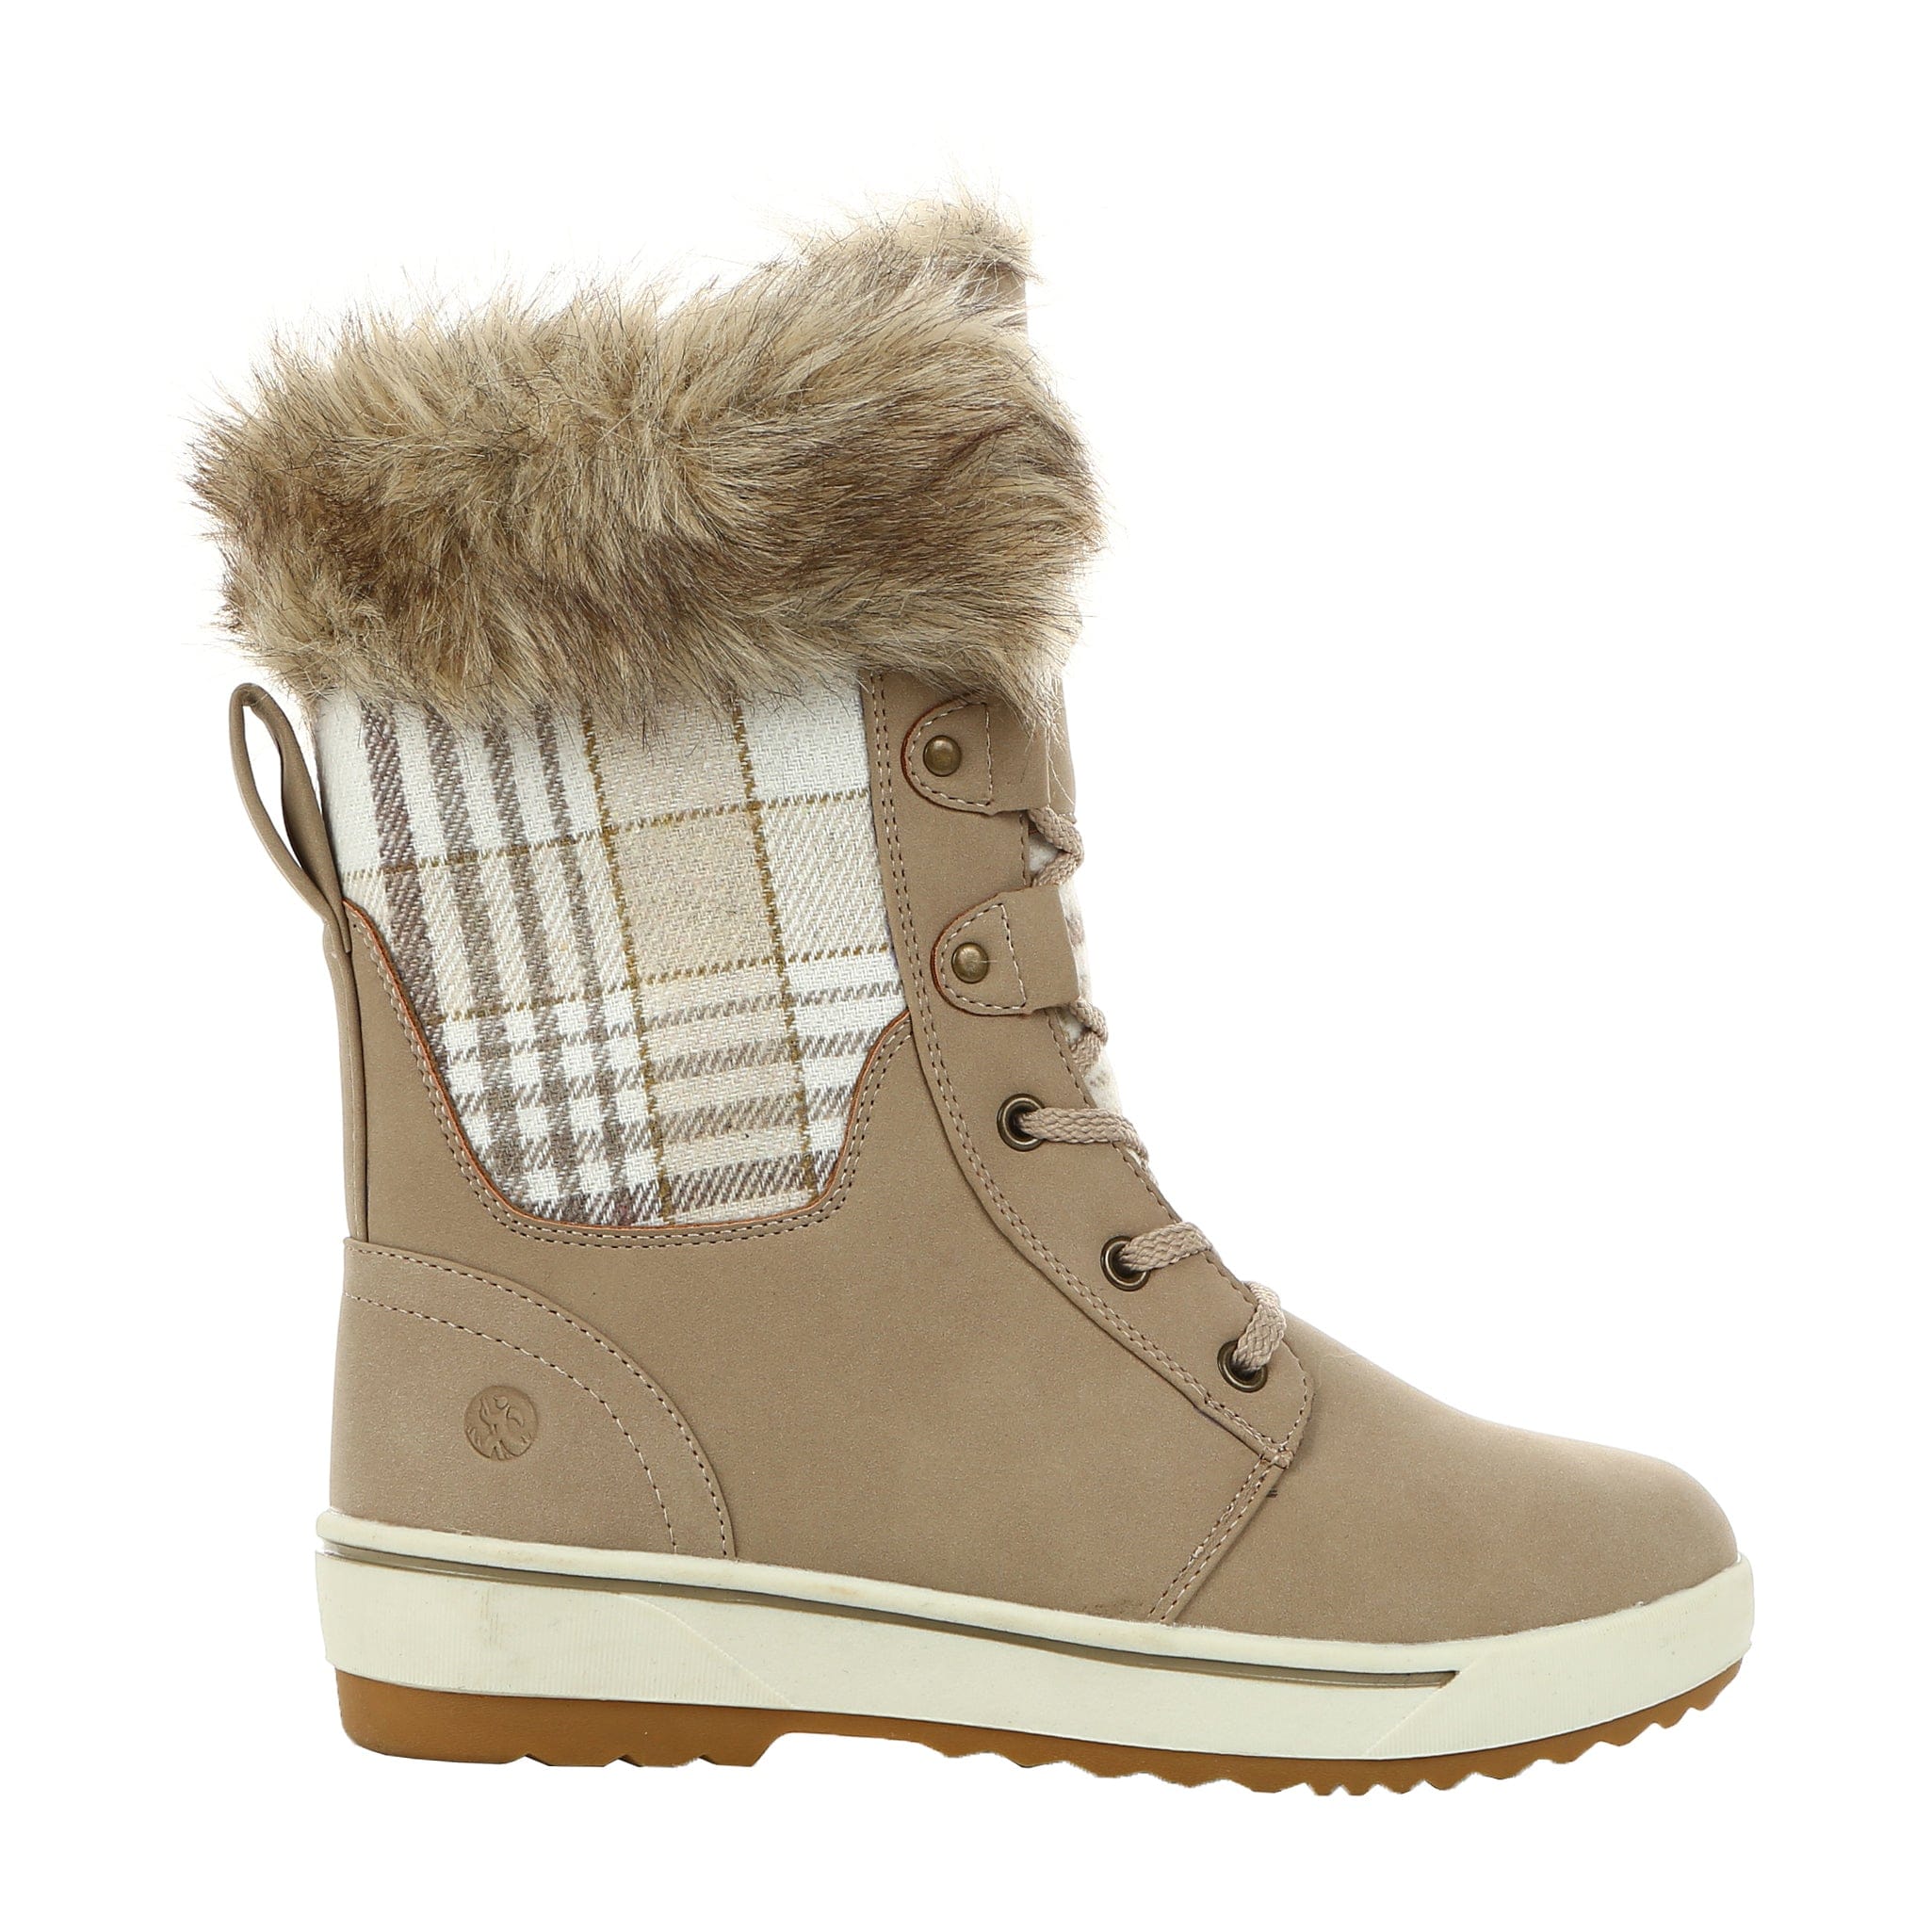 Women's Brookelle SE Cold Weather Fashion Boot - Northside USA